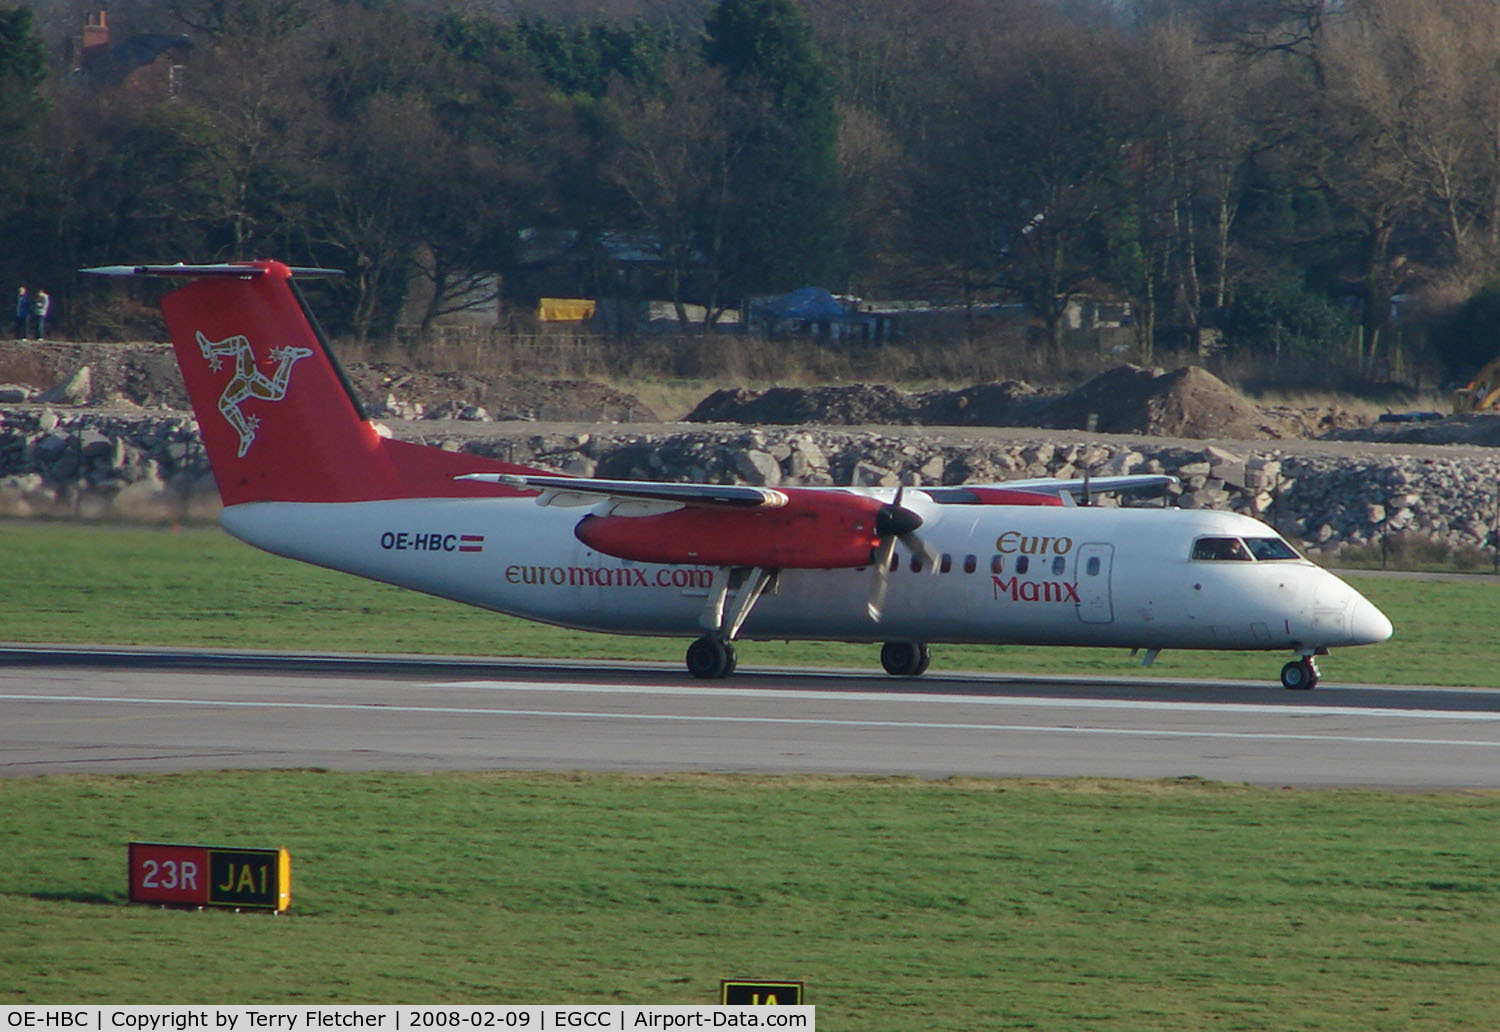 OE-HBC, 1999 De Havilland Canada DHC-8-311 Dash 8 C/N 533, Euromanx leased Dash 8 about to depart Manchester in Feb 2008